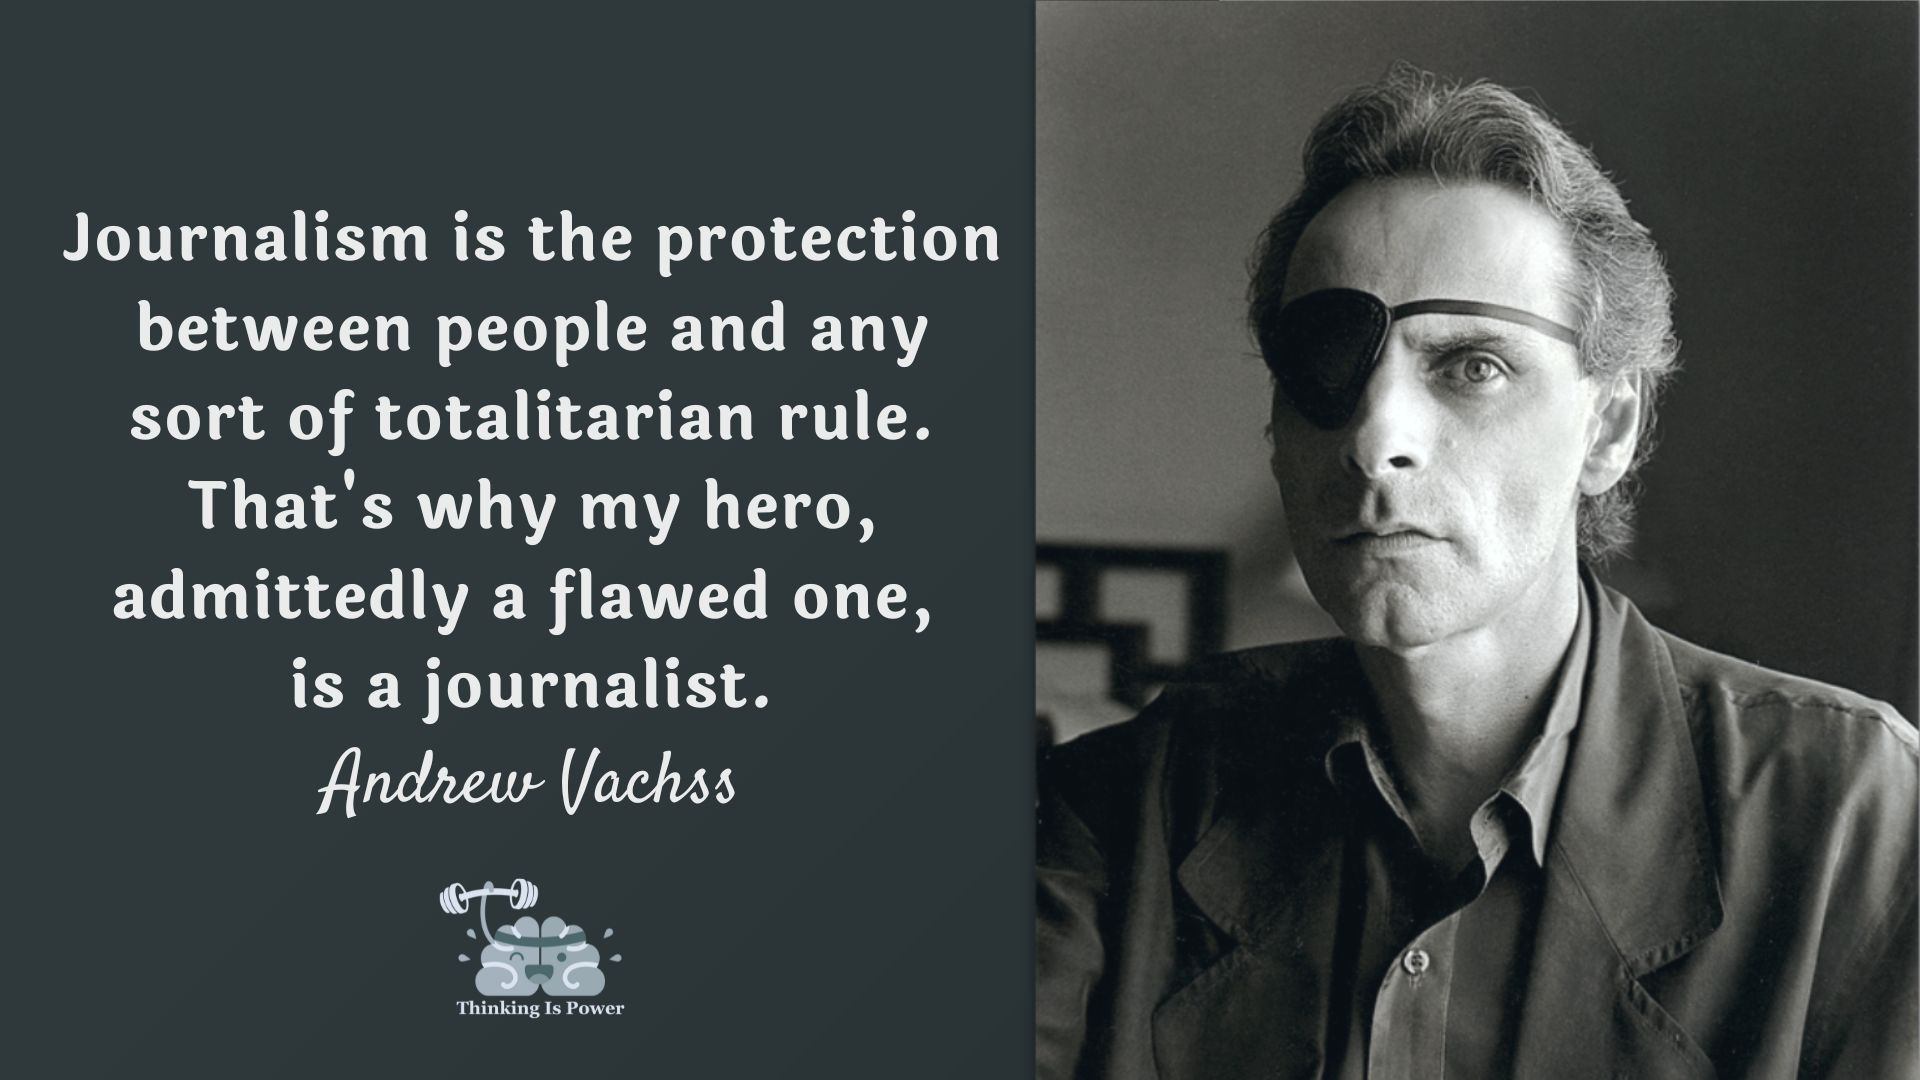 Andrew Vachss Quote Journalism is the protection between people and any sort of totalitarian rule. That's why my hero, admittedly a flawed one, is a journalist.